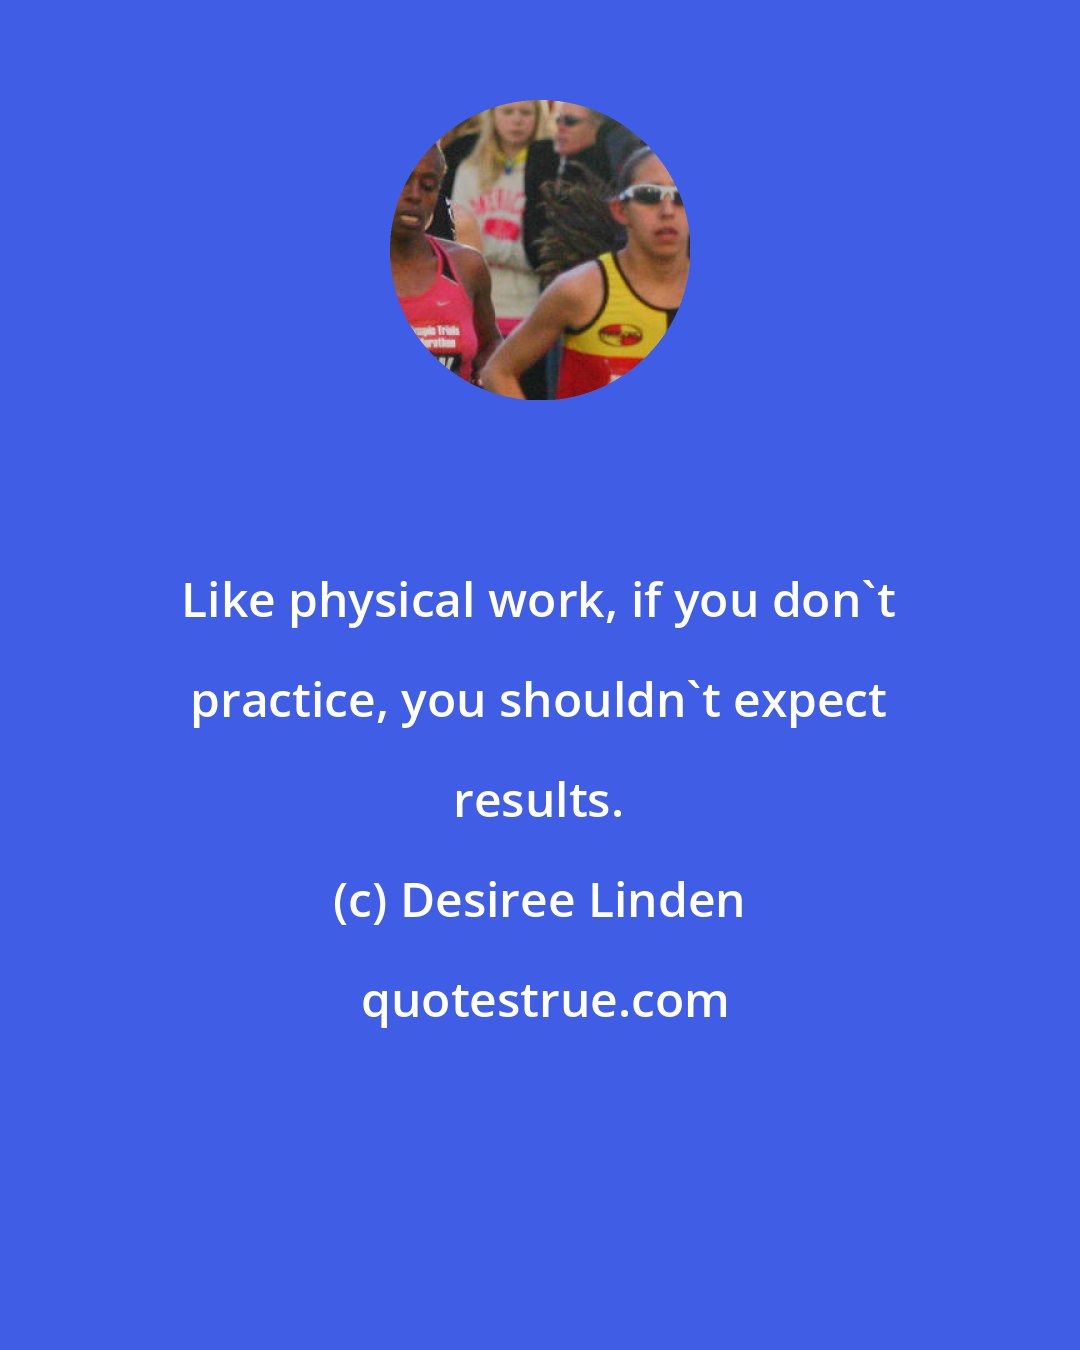 Desiree Linden: Like physical work, if you don't practice, you shouldn't expect results.